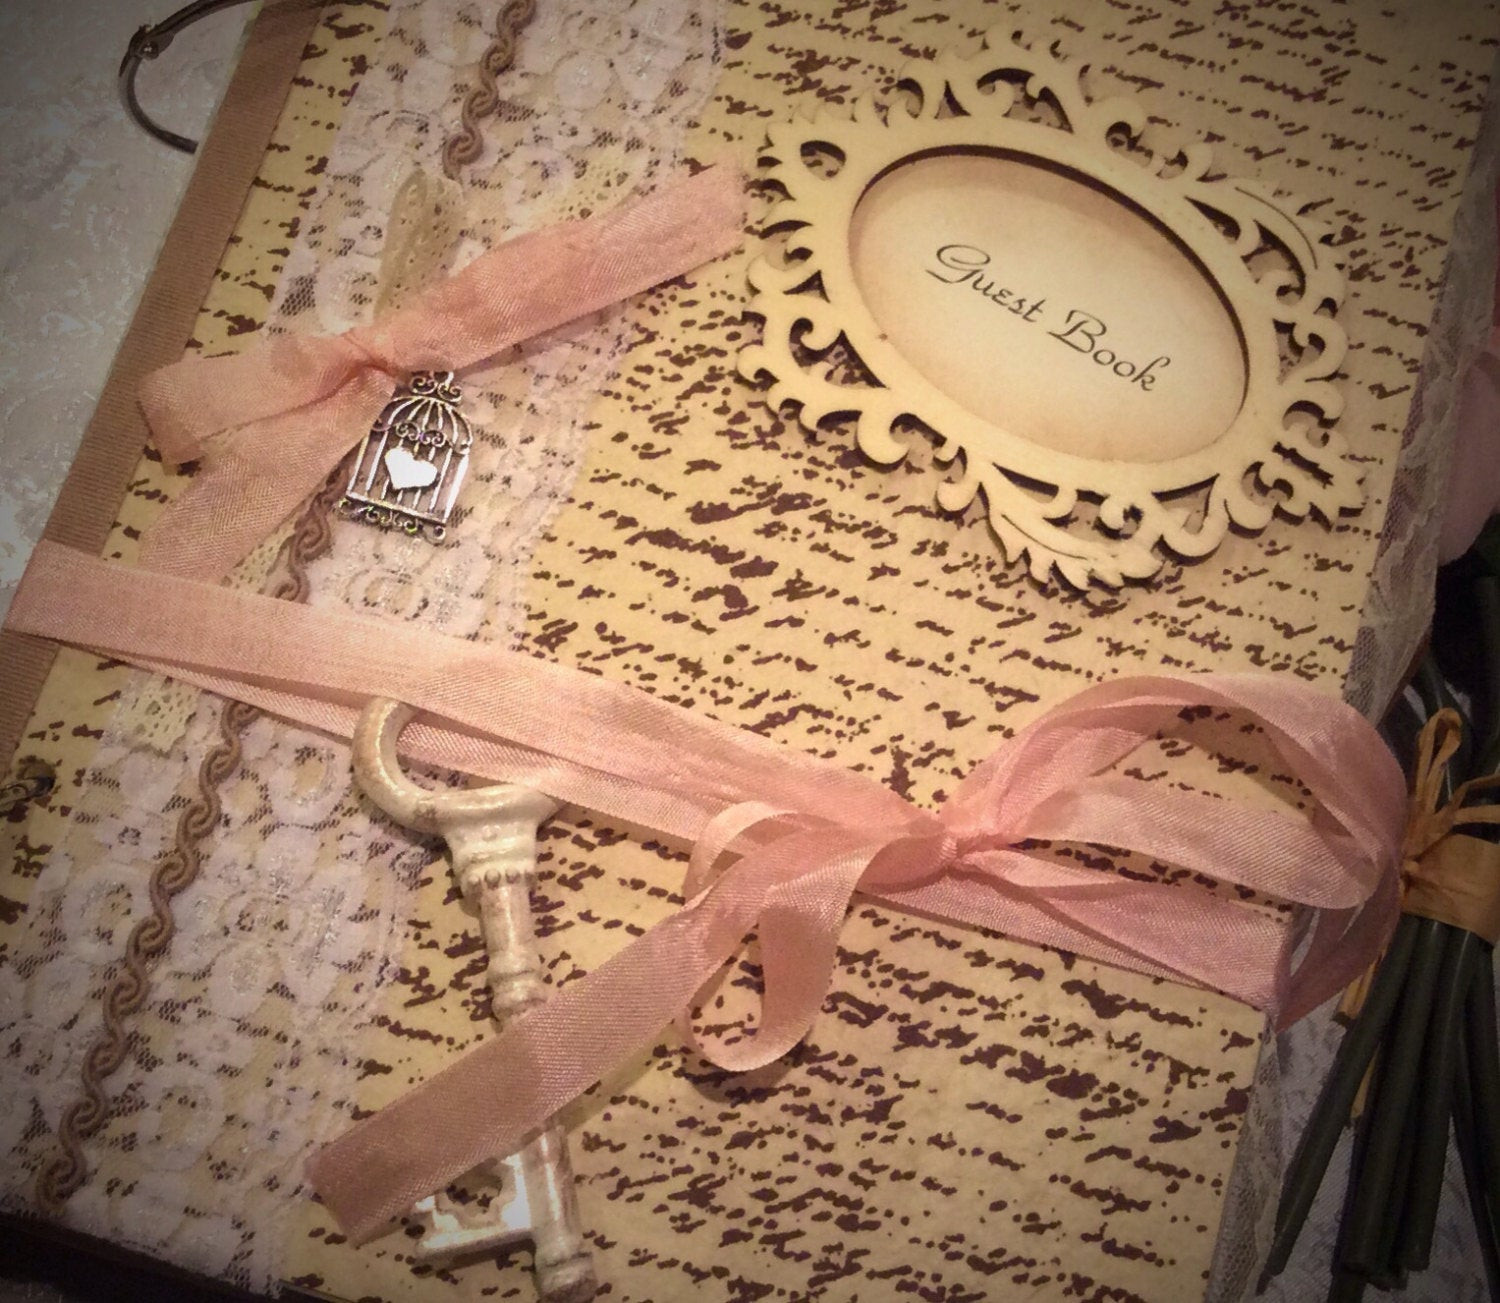 Classic Wedding Guest Book
 Vintage inspired wedding guest book